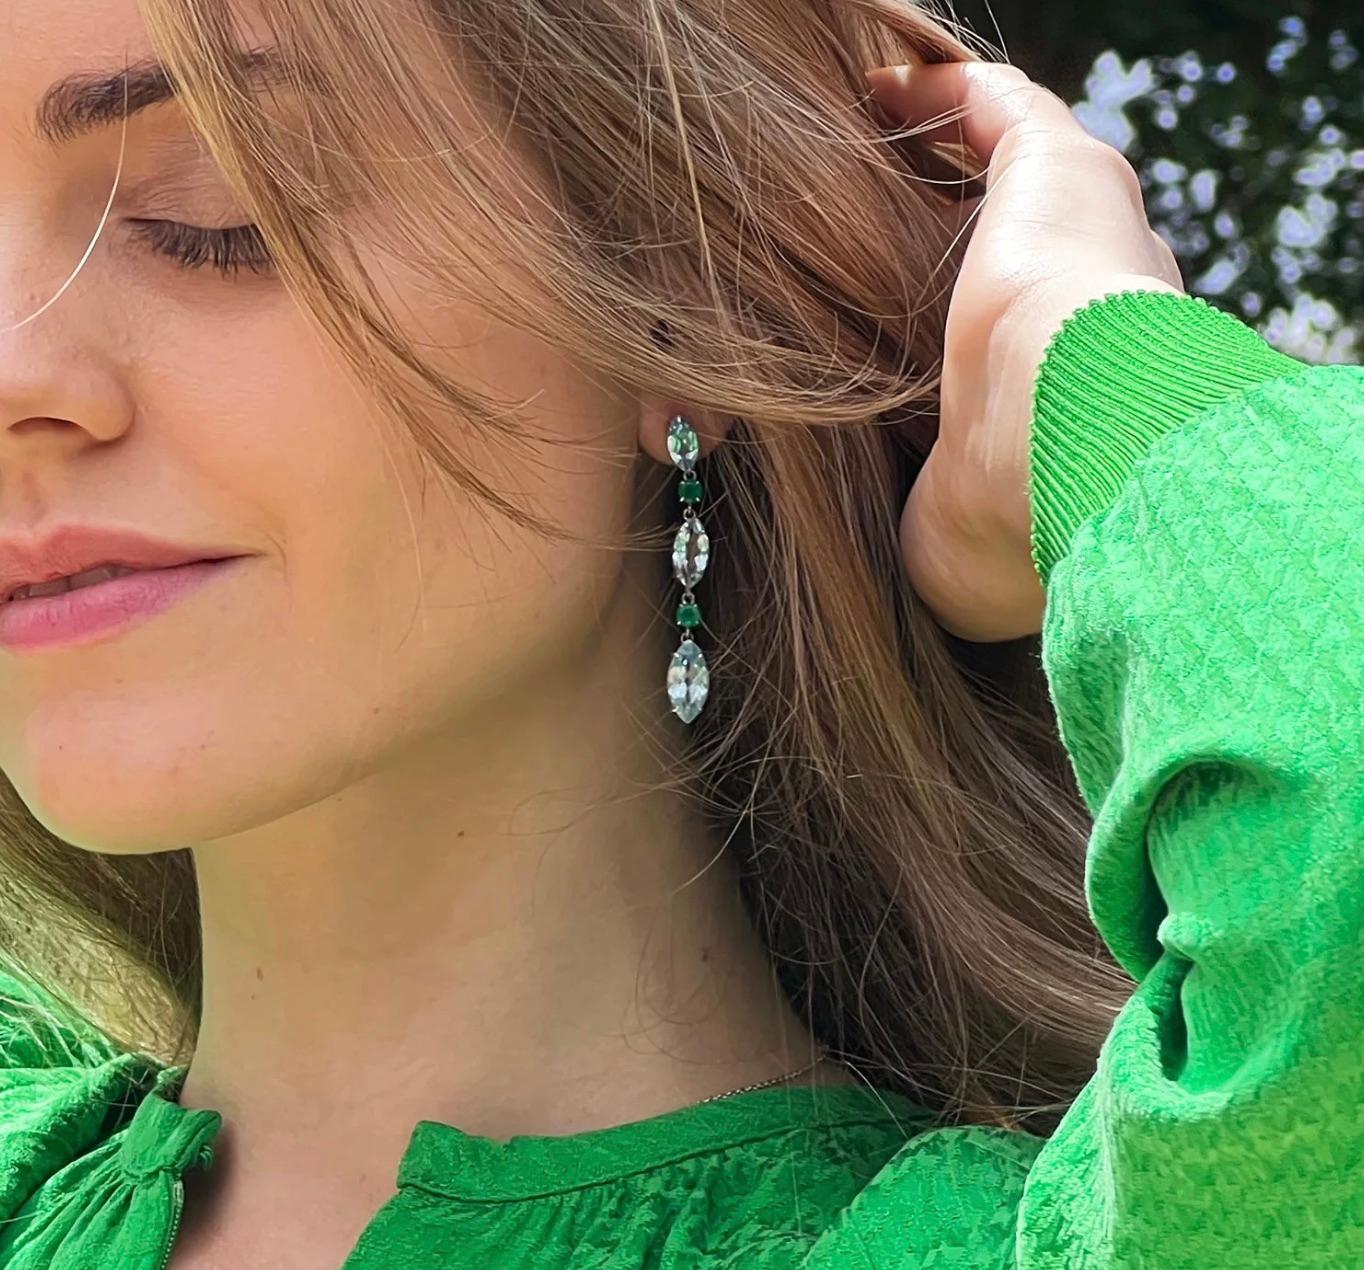 The Blue Topaz & Agate Earrings are elegant and chic. With the bright sky blue topaz marquise cuts and gorgeous green agates in between, these earrings are perfect for a day to day wear and to special events. Marquise-cut Blue Topaz and round Green